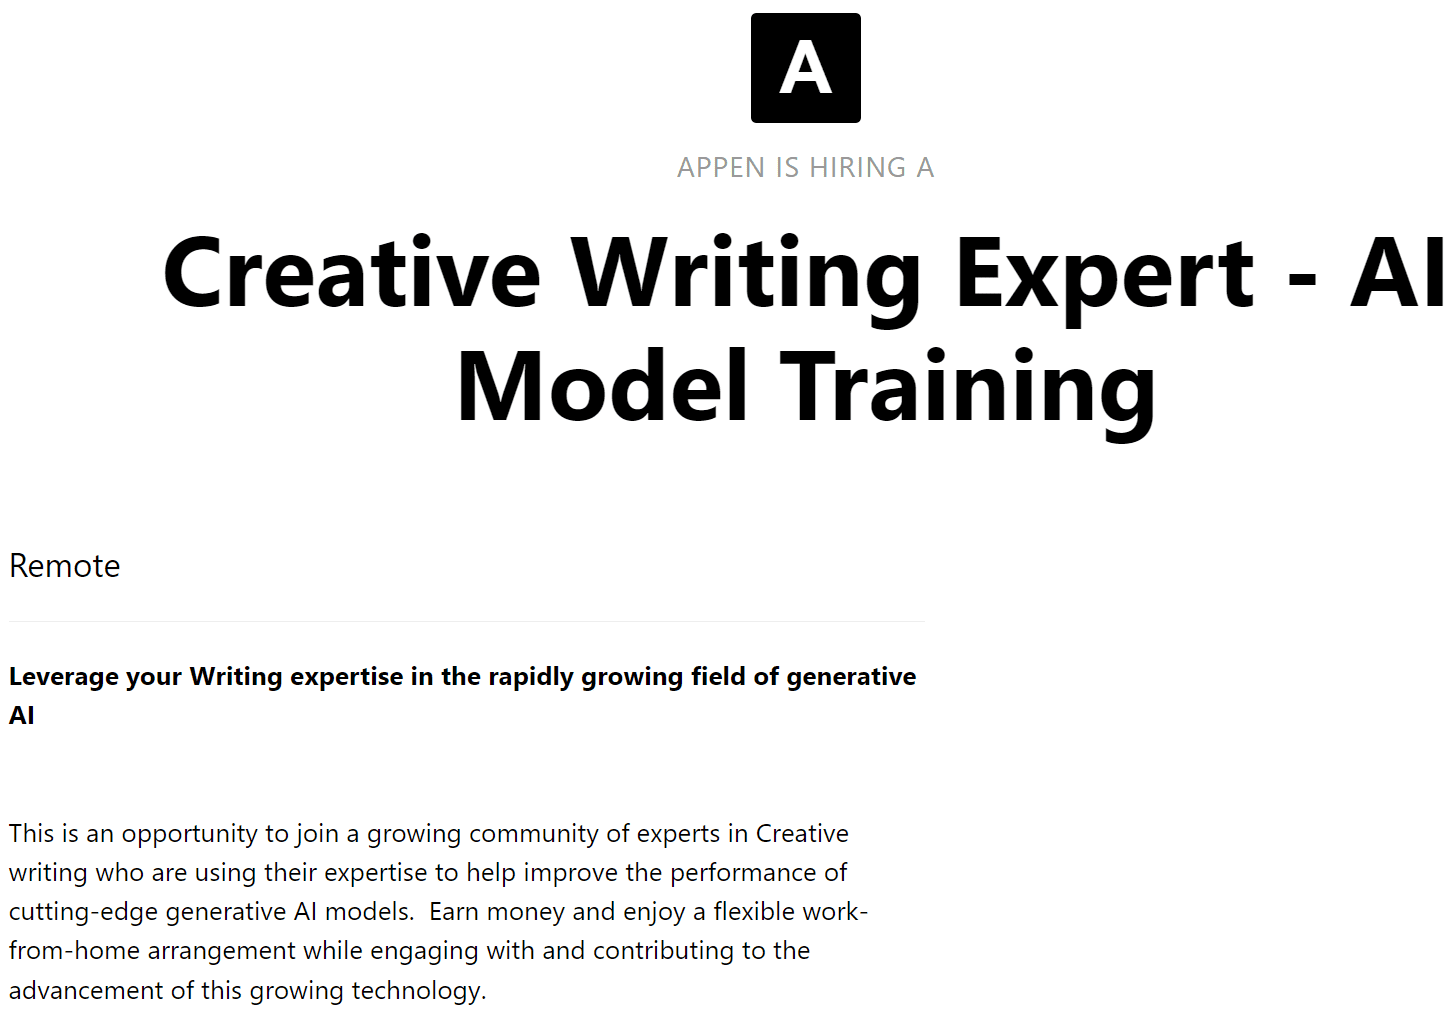 Job advertisement for a creative writing expert in AI model training